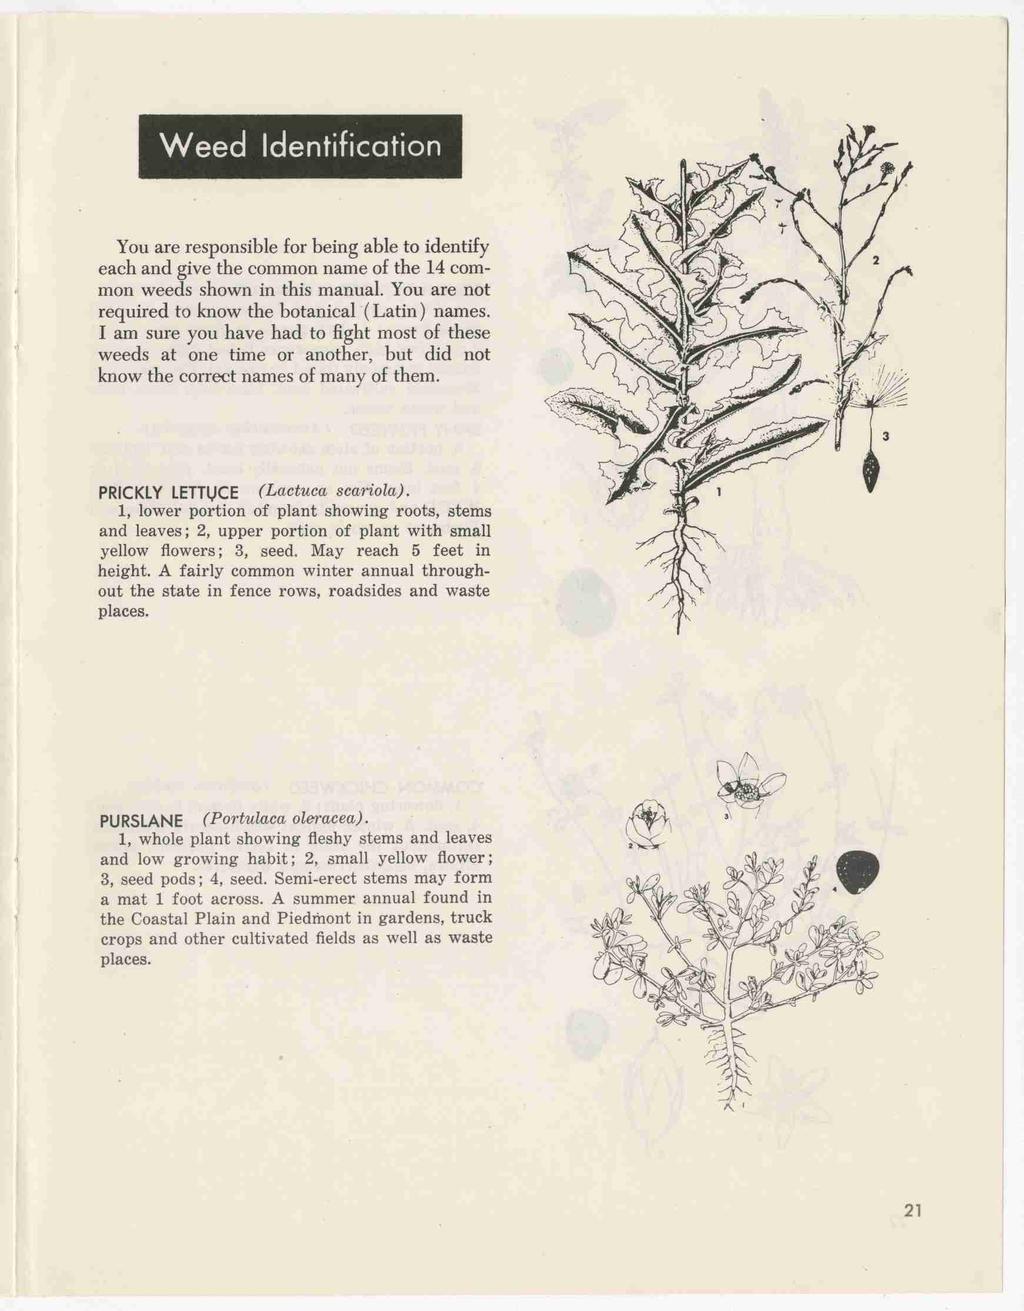 Weed Identification You are responsible for being able to identify each and give the common name of the 14 common weeds shown in this manual. You are not required to know the botanical (Latin) names.